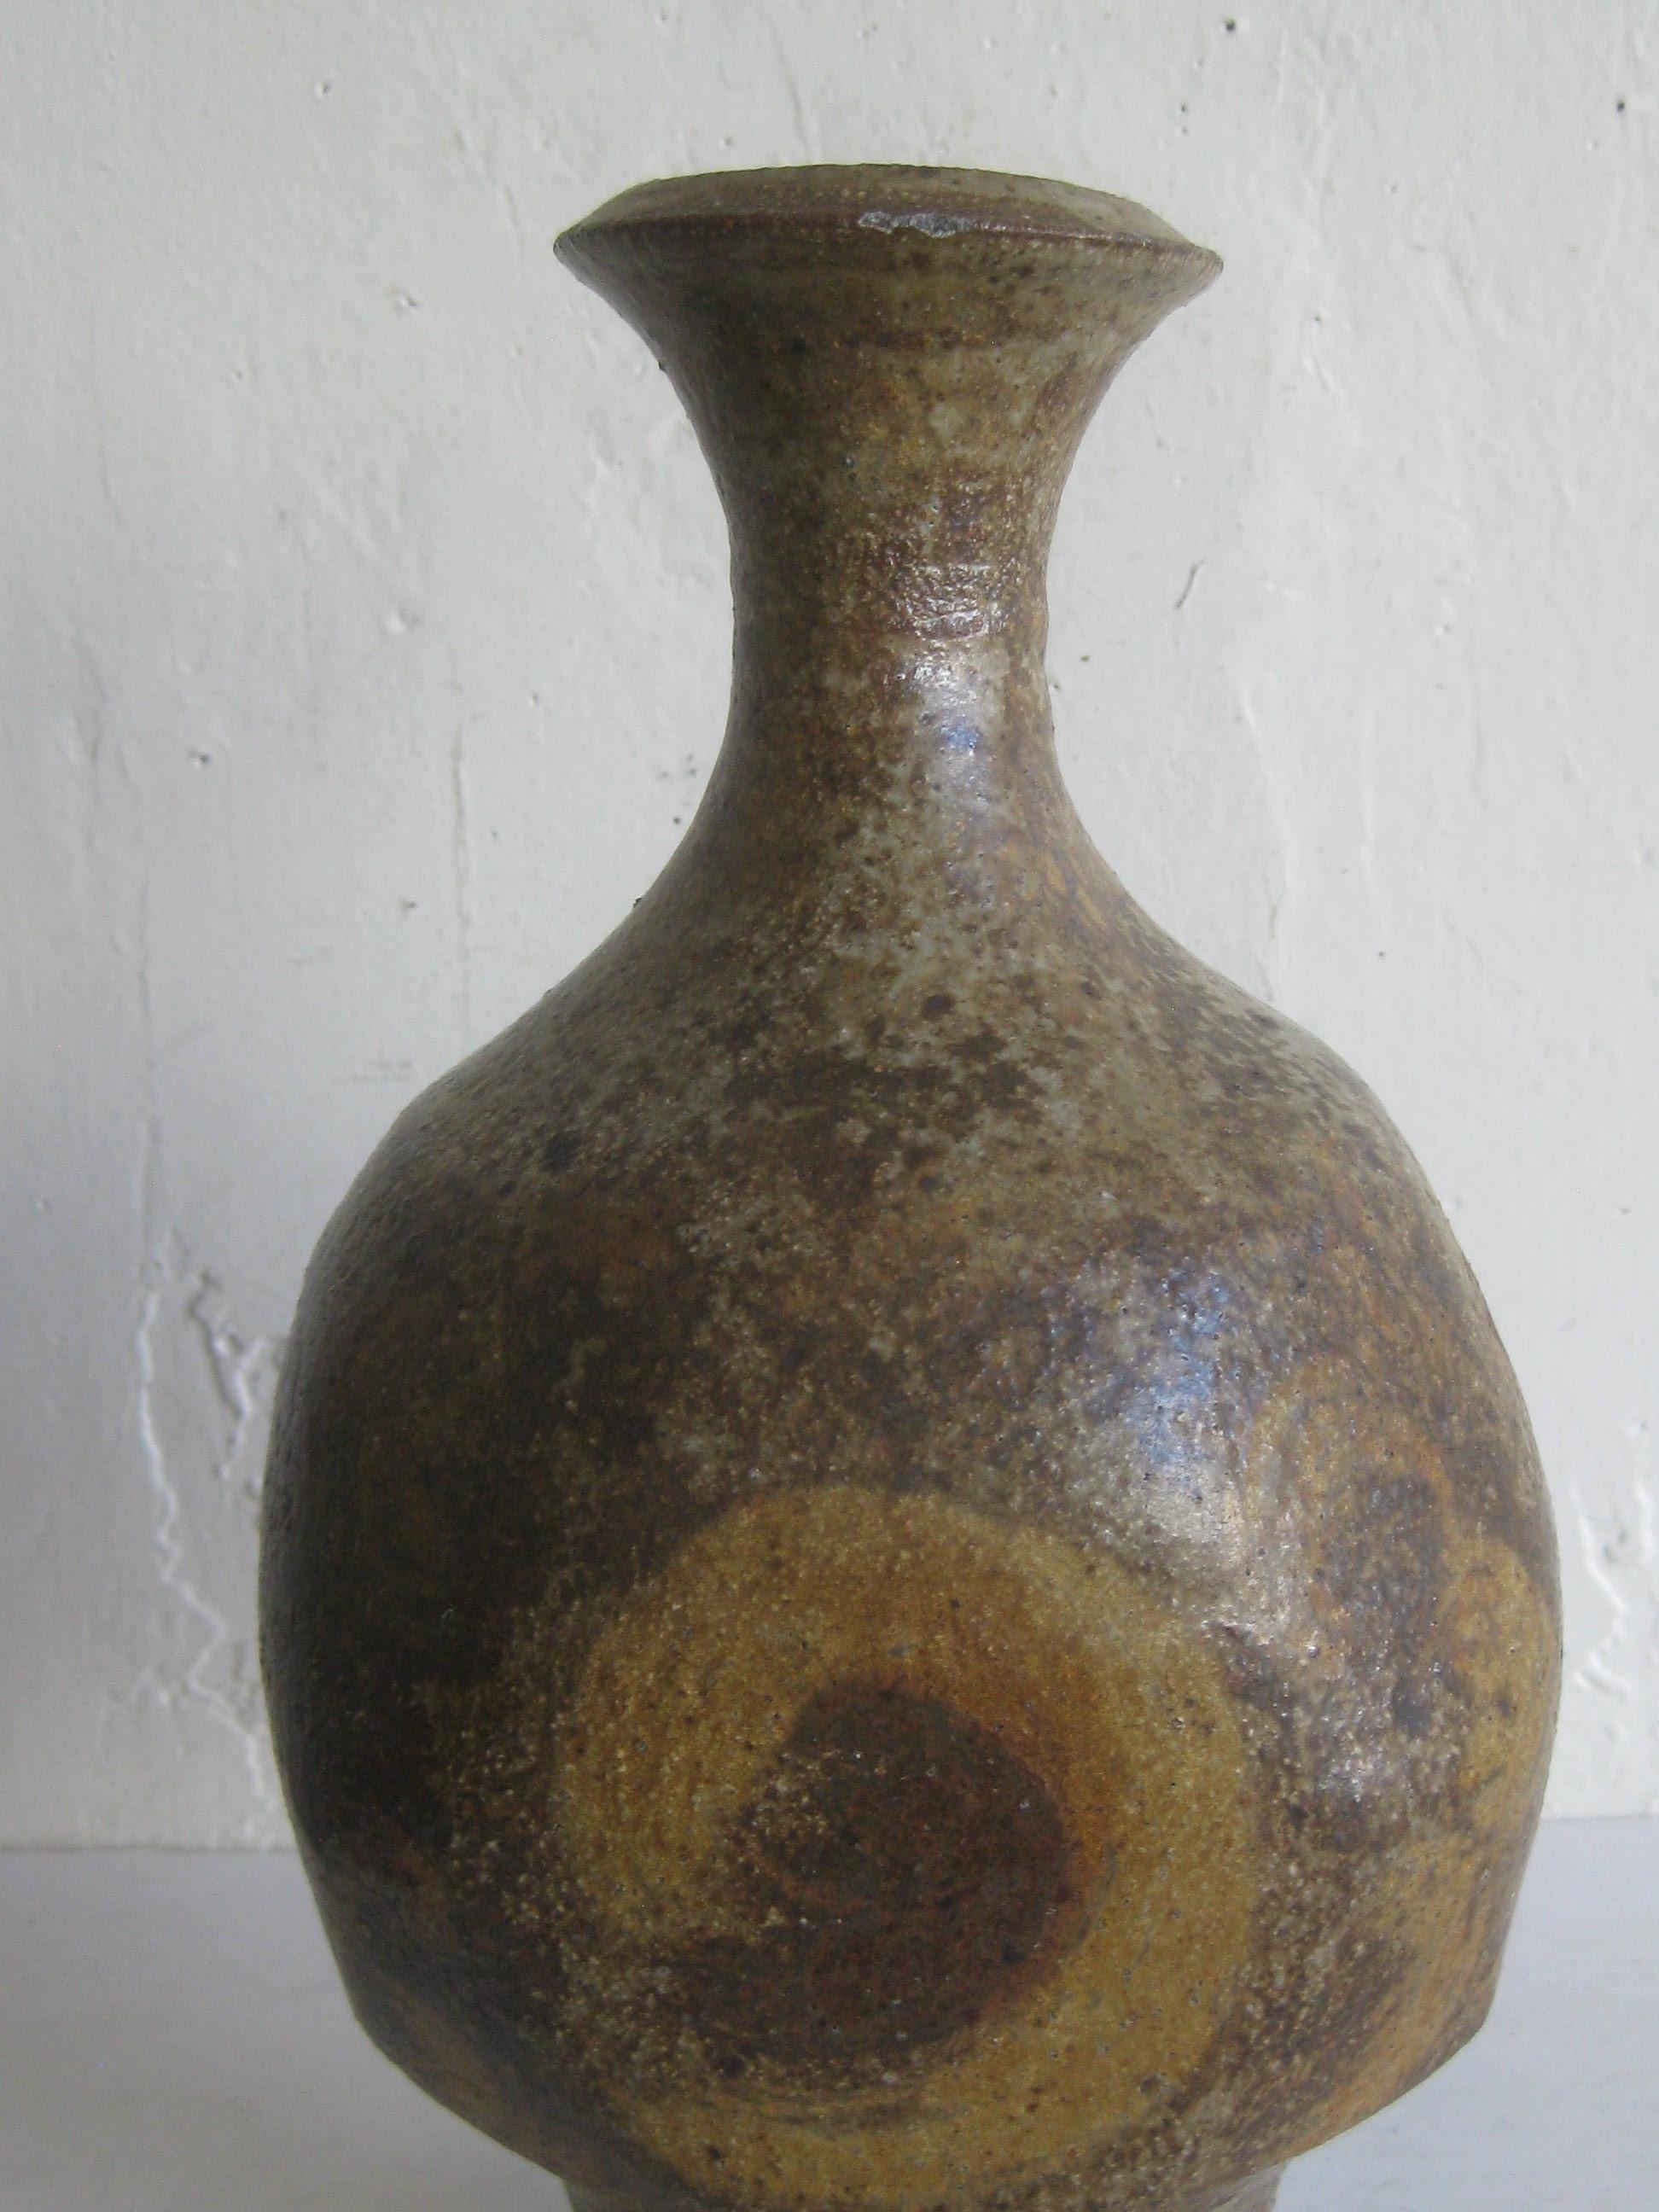 Great studio art pottery vase/vessel by well known British artist, Robert Fournier. The vase has a wonderful design and form. Signed by the artist mark 